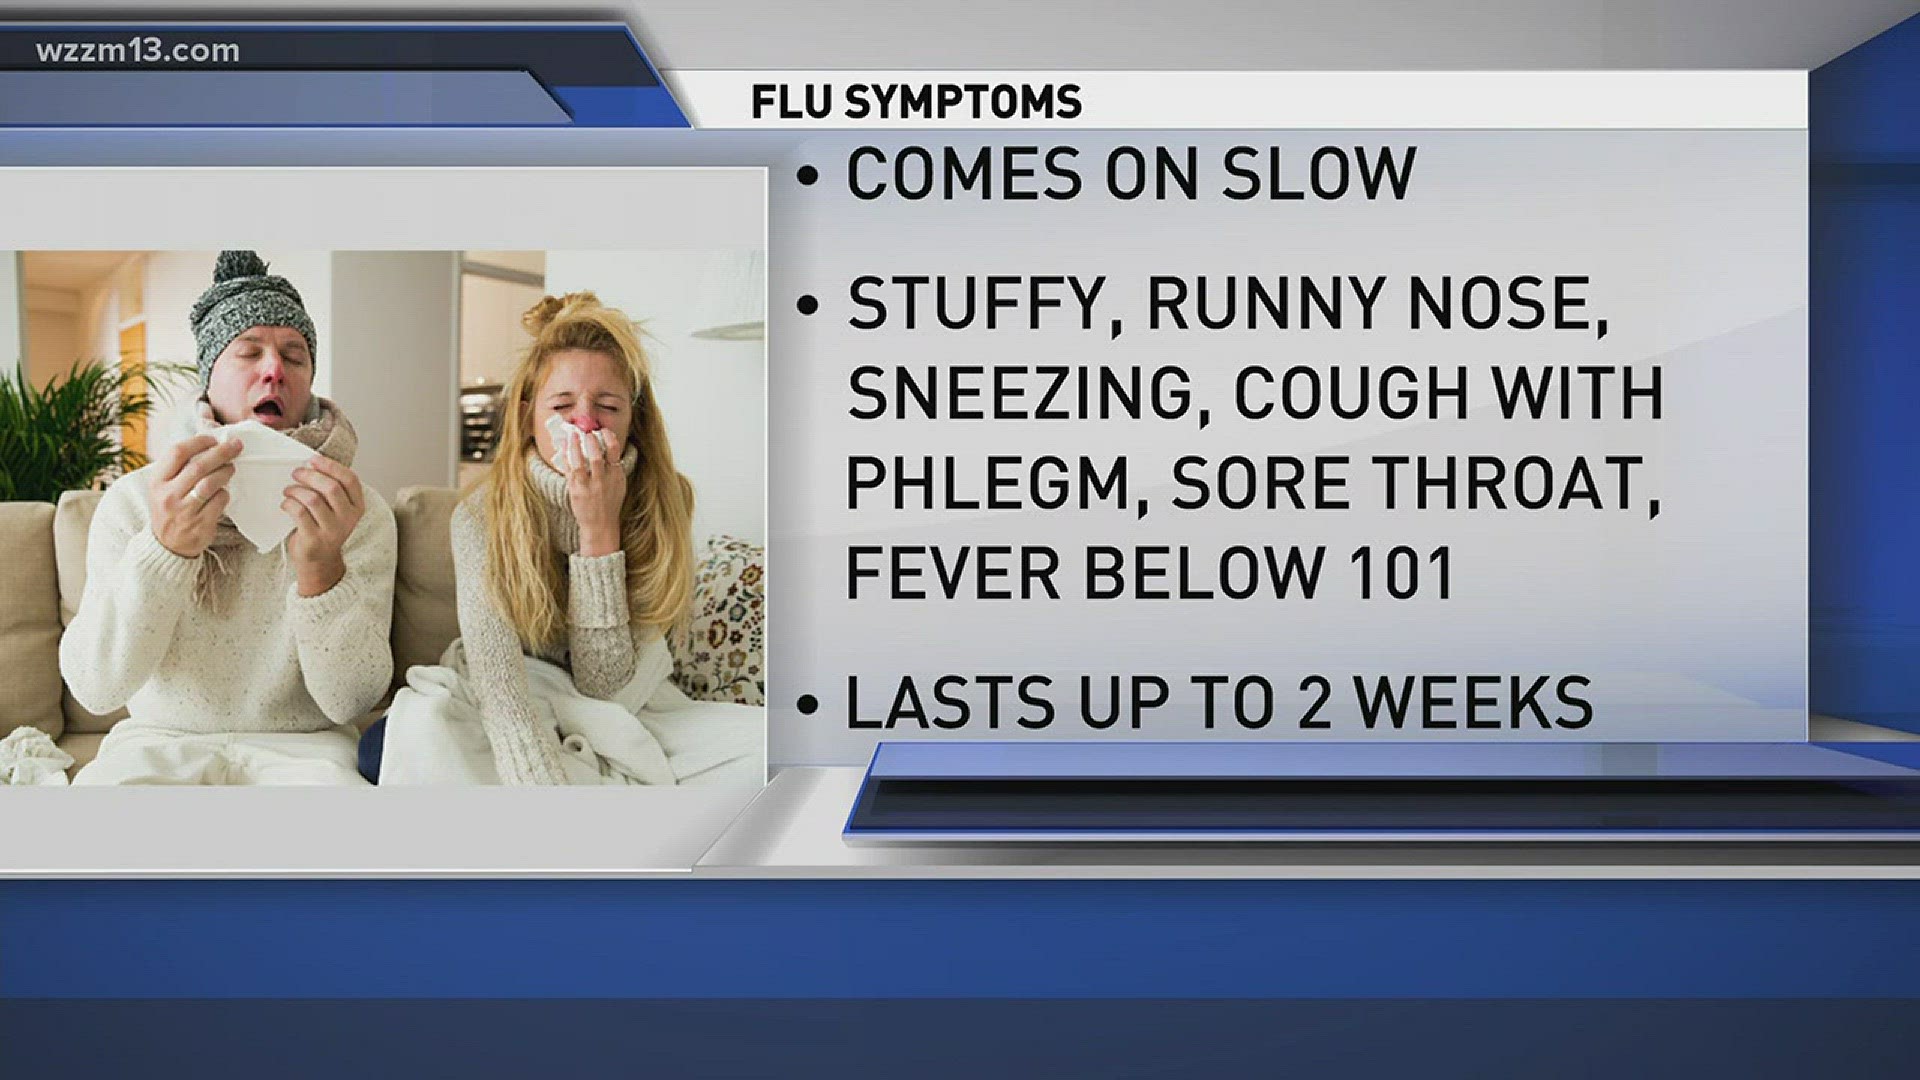 The differences between a cold and flu